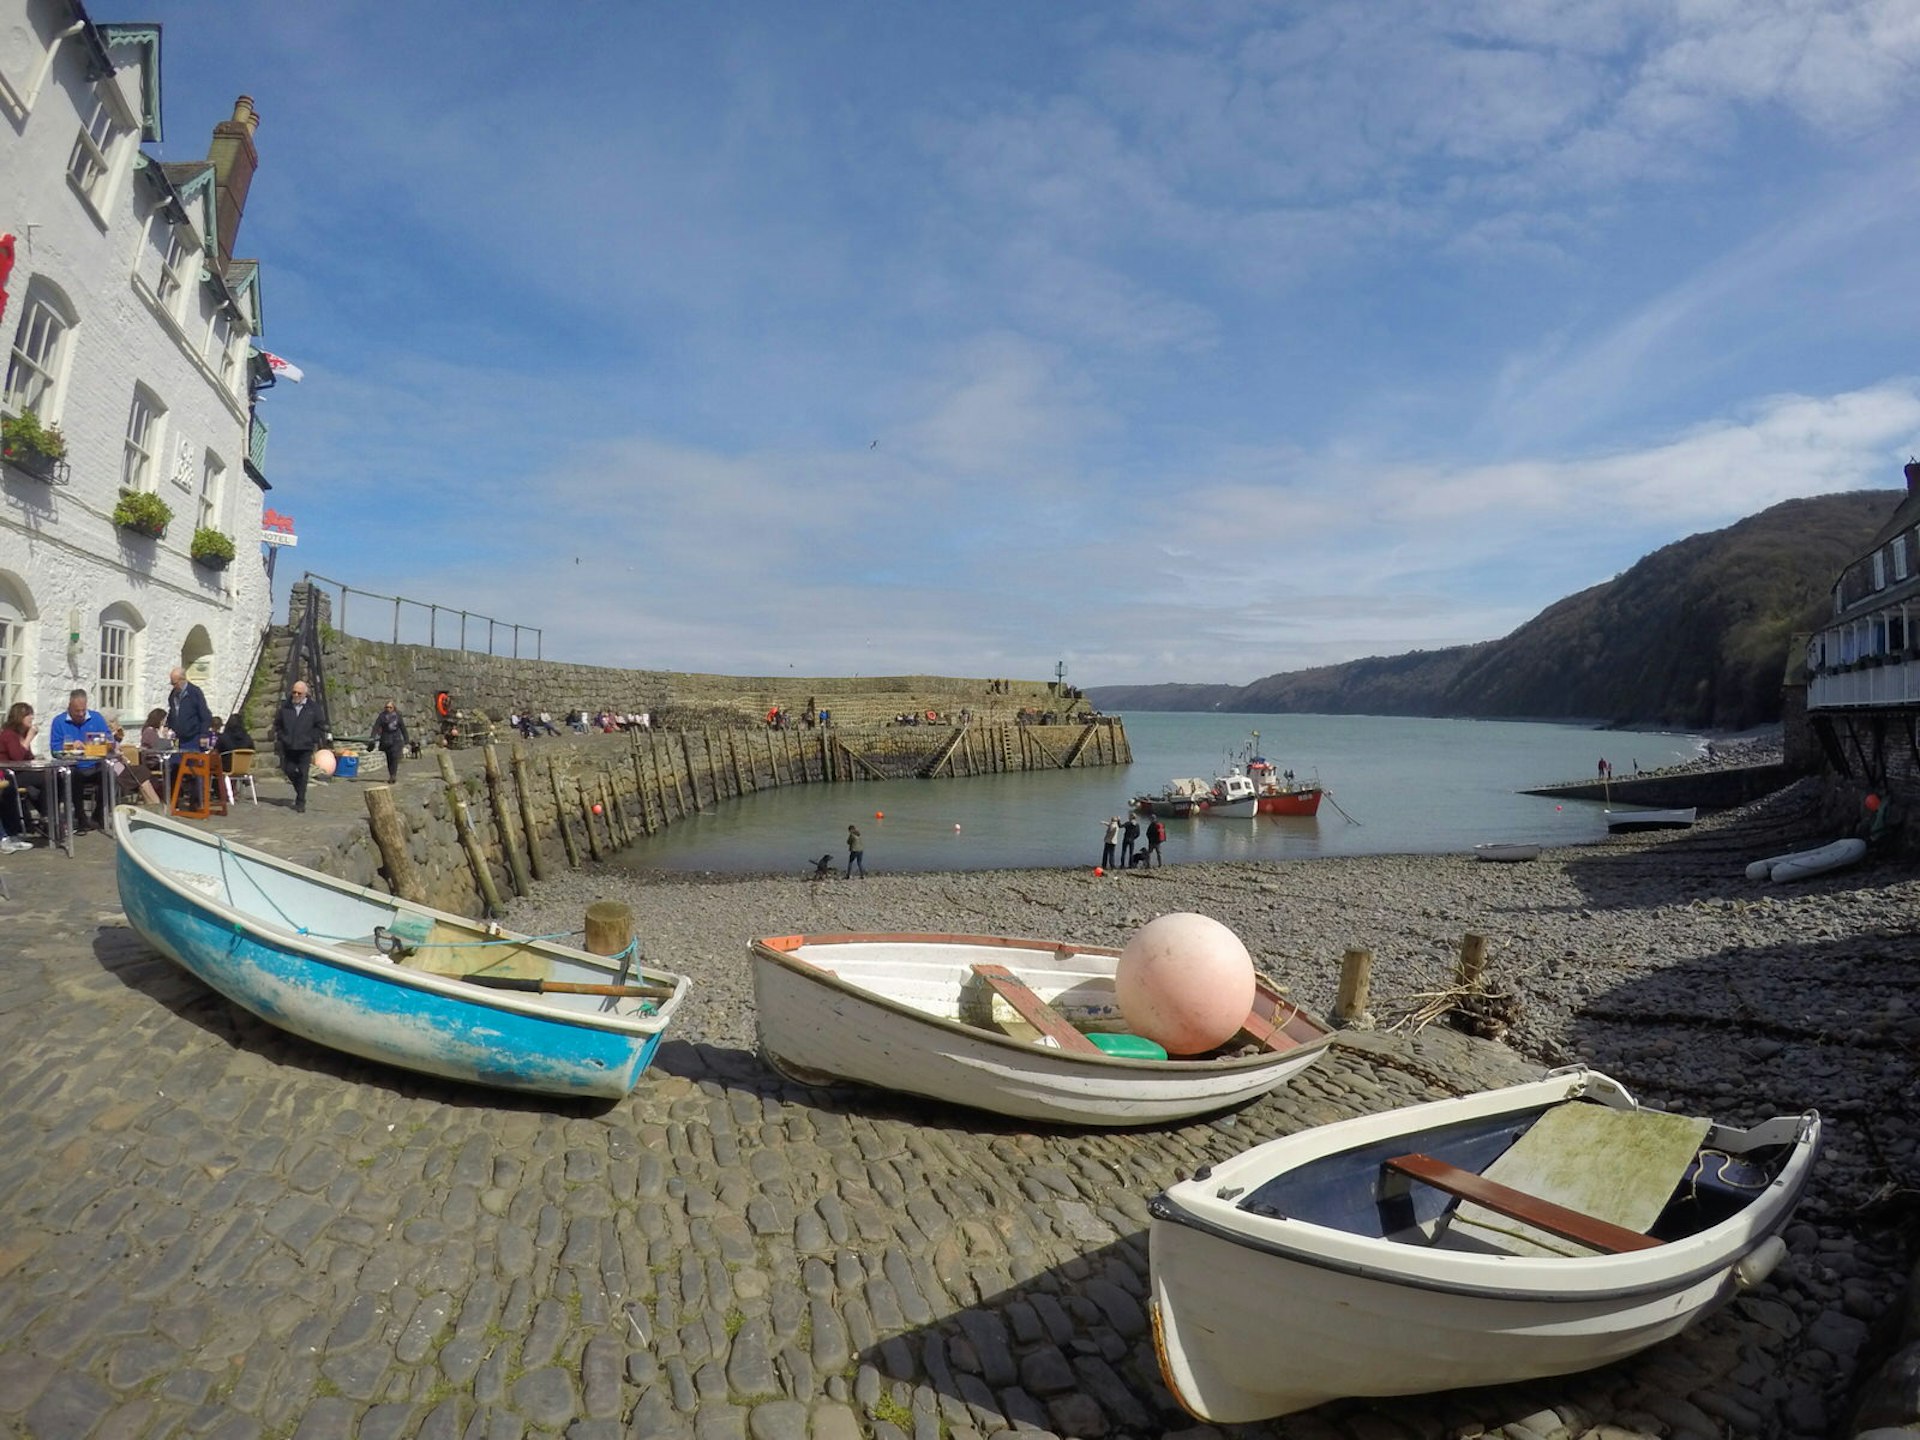 Boats and beers at the Red Lion Inn, Clovelly, Devon © Belinda Dixon / Lonely Planet